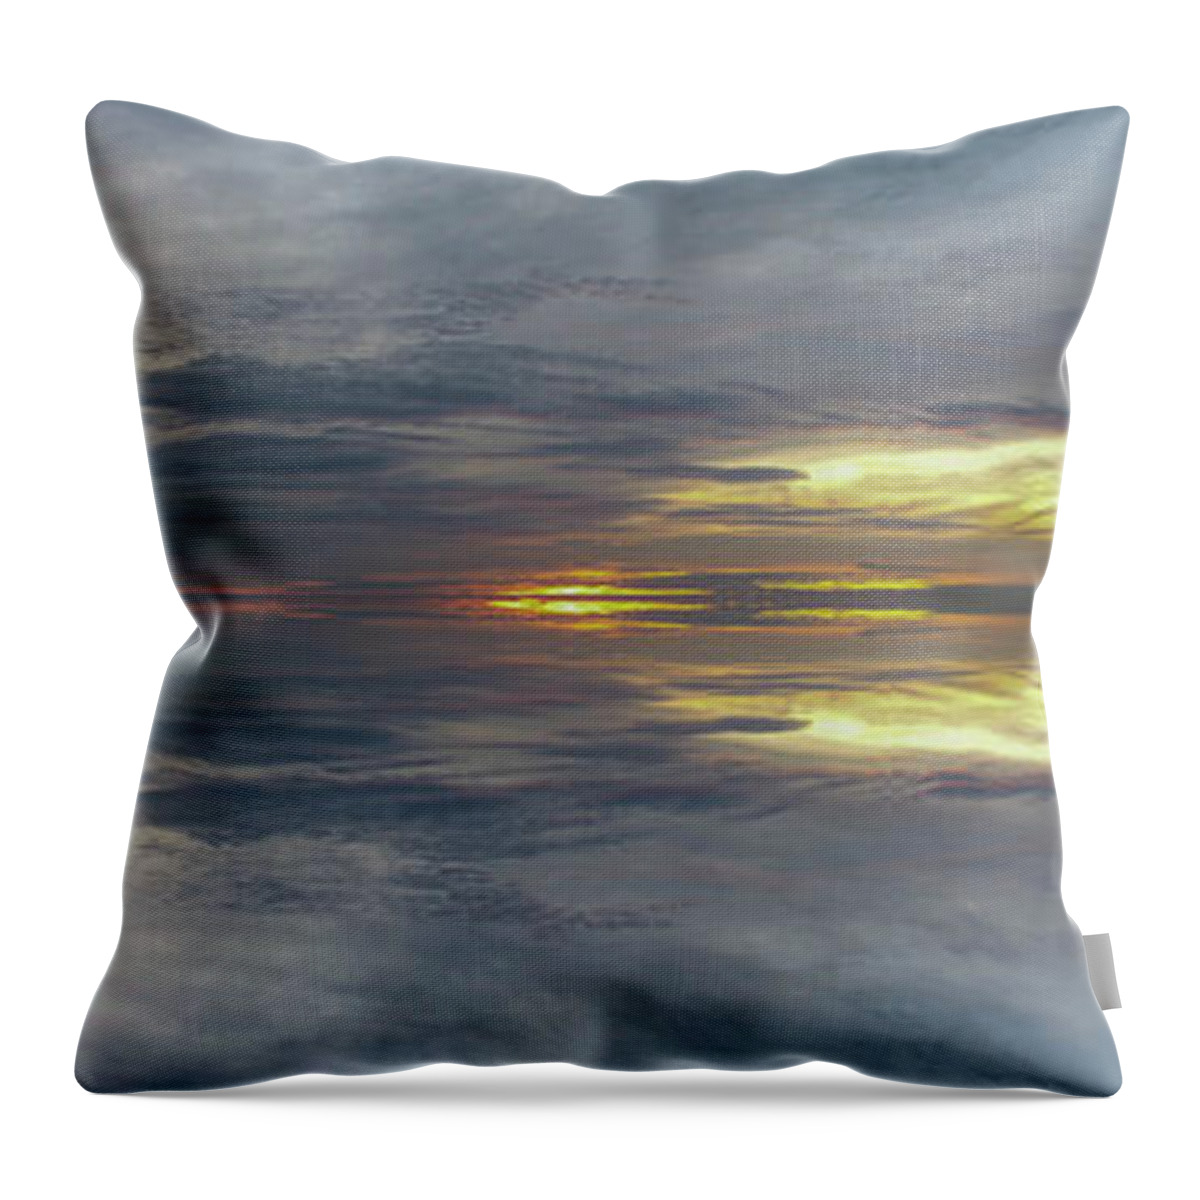  Throw Pillow featuring the photograph Flip by Brian Jones